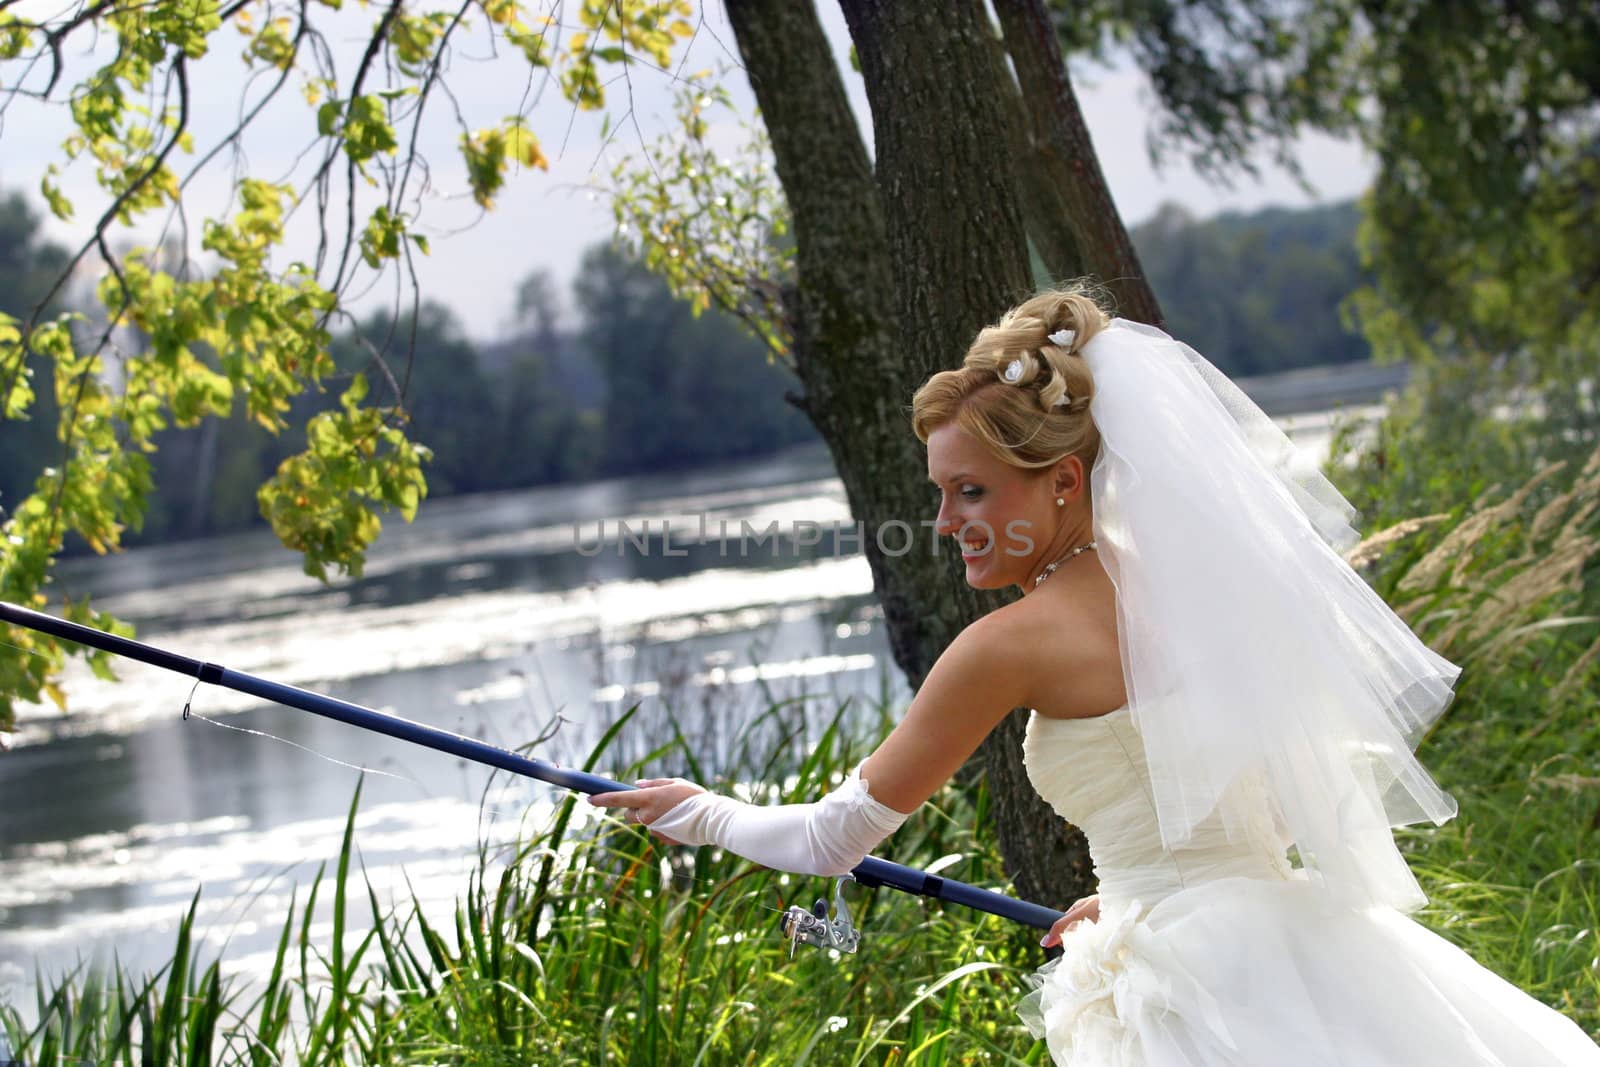 The beautiful bride with fishing tackle